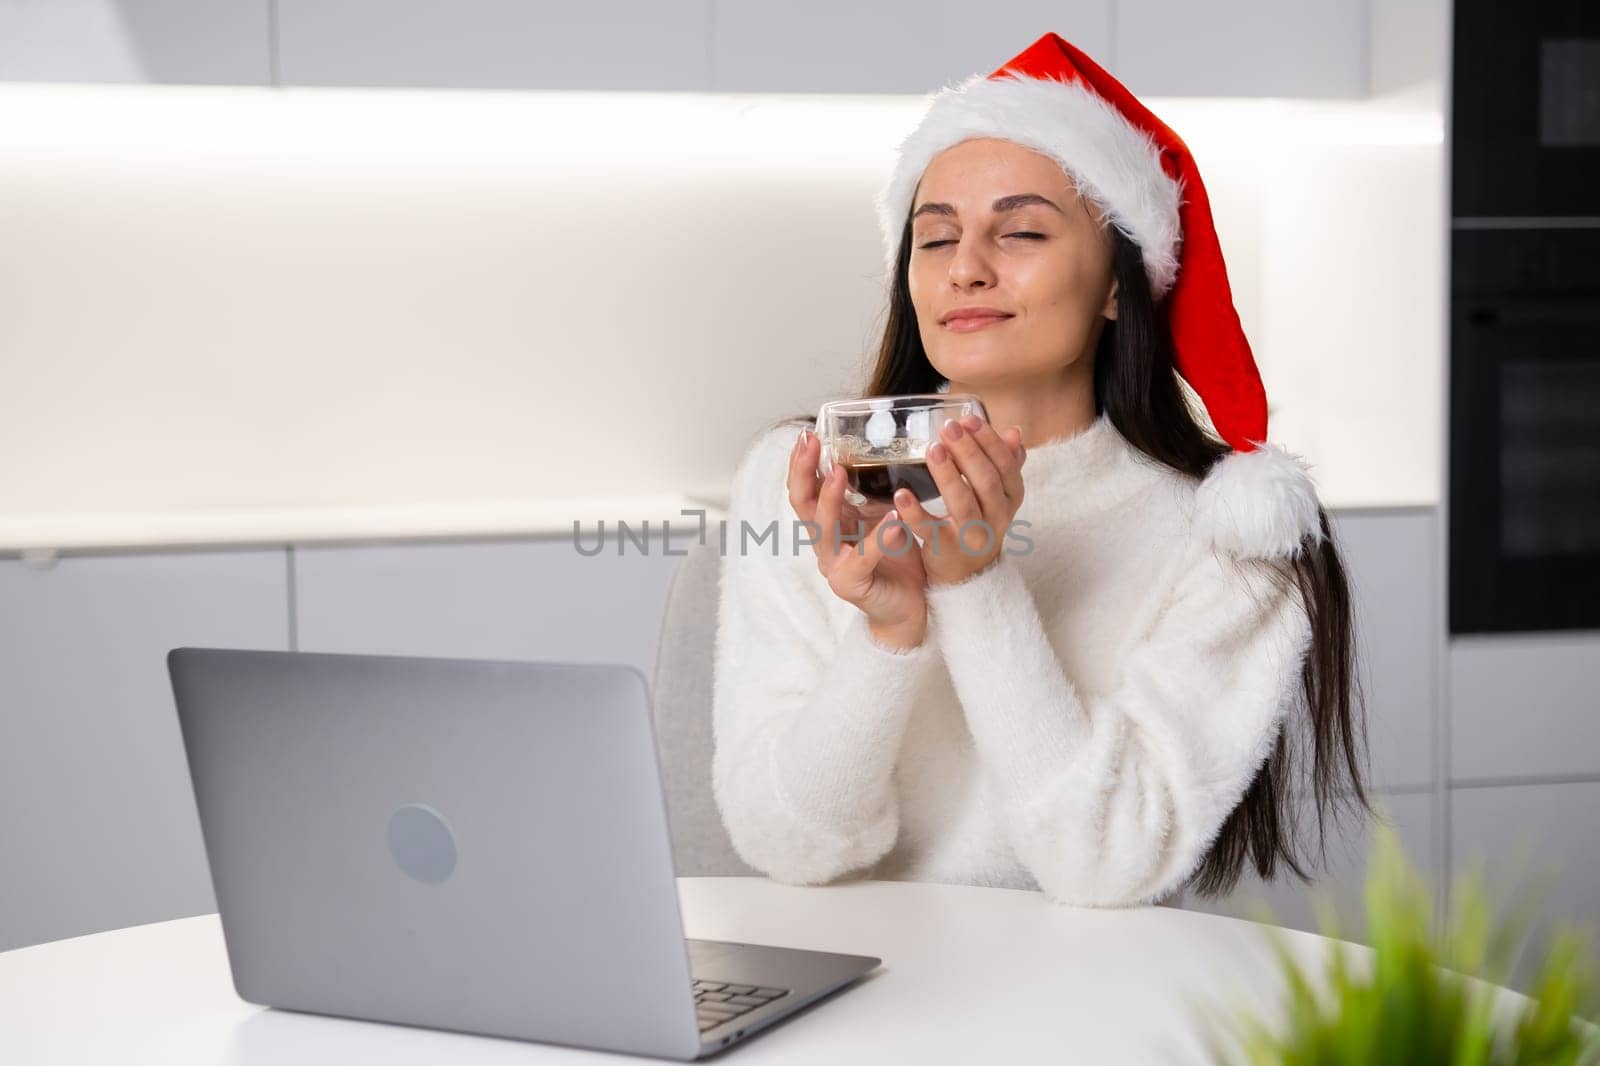 A dreamy woman in a Santa Claus hat closes her eyes and enjoys her coffee on a coffee break while working at home using her laptop